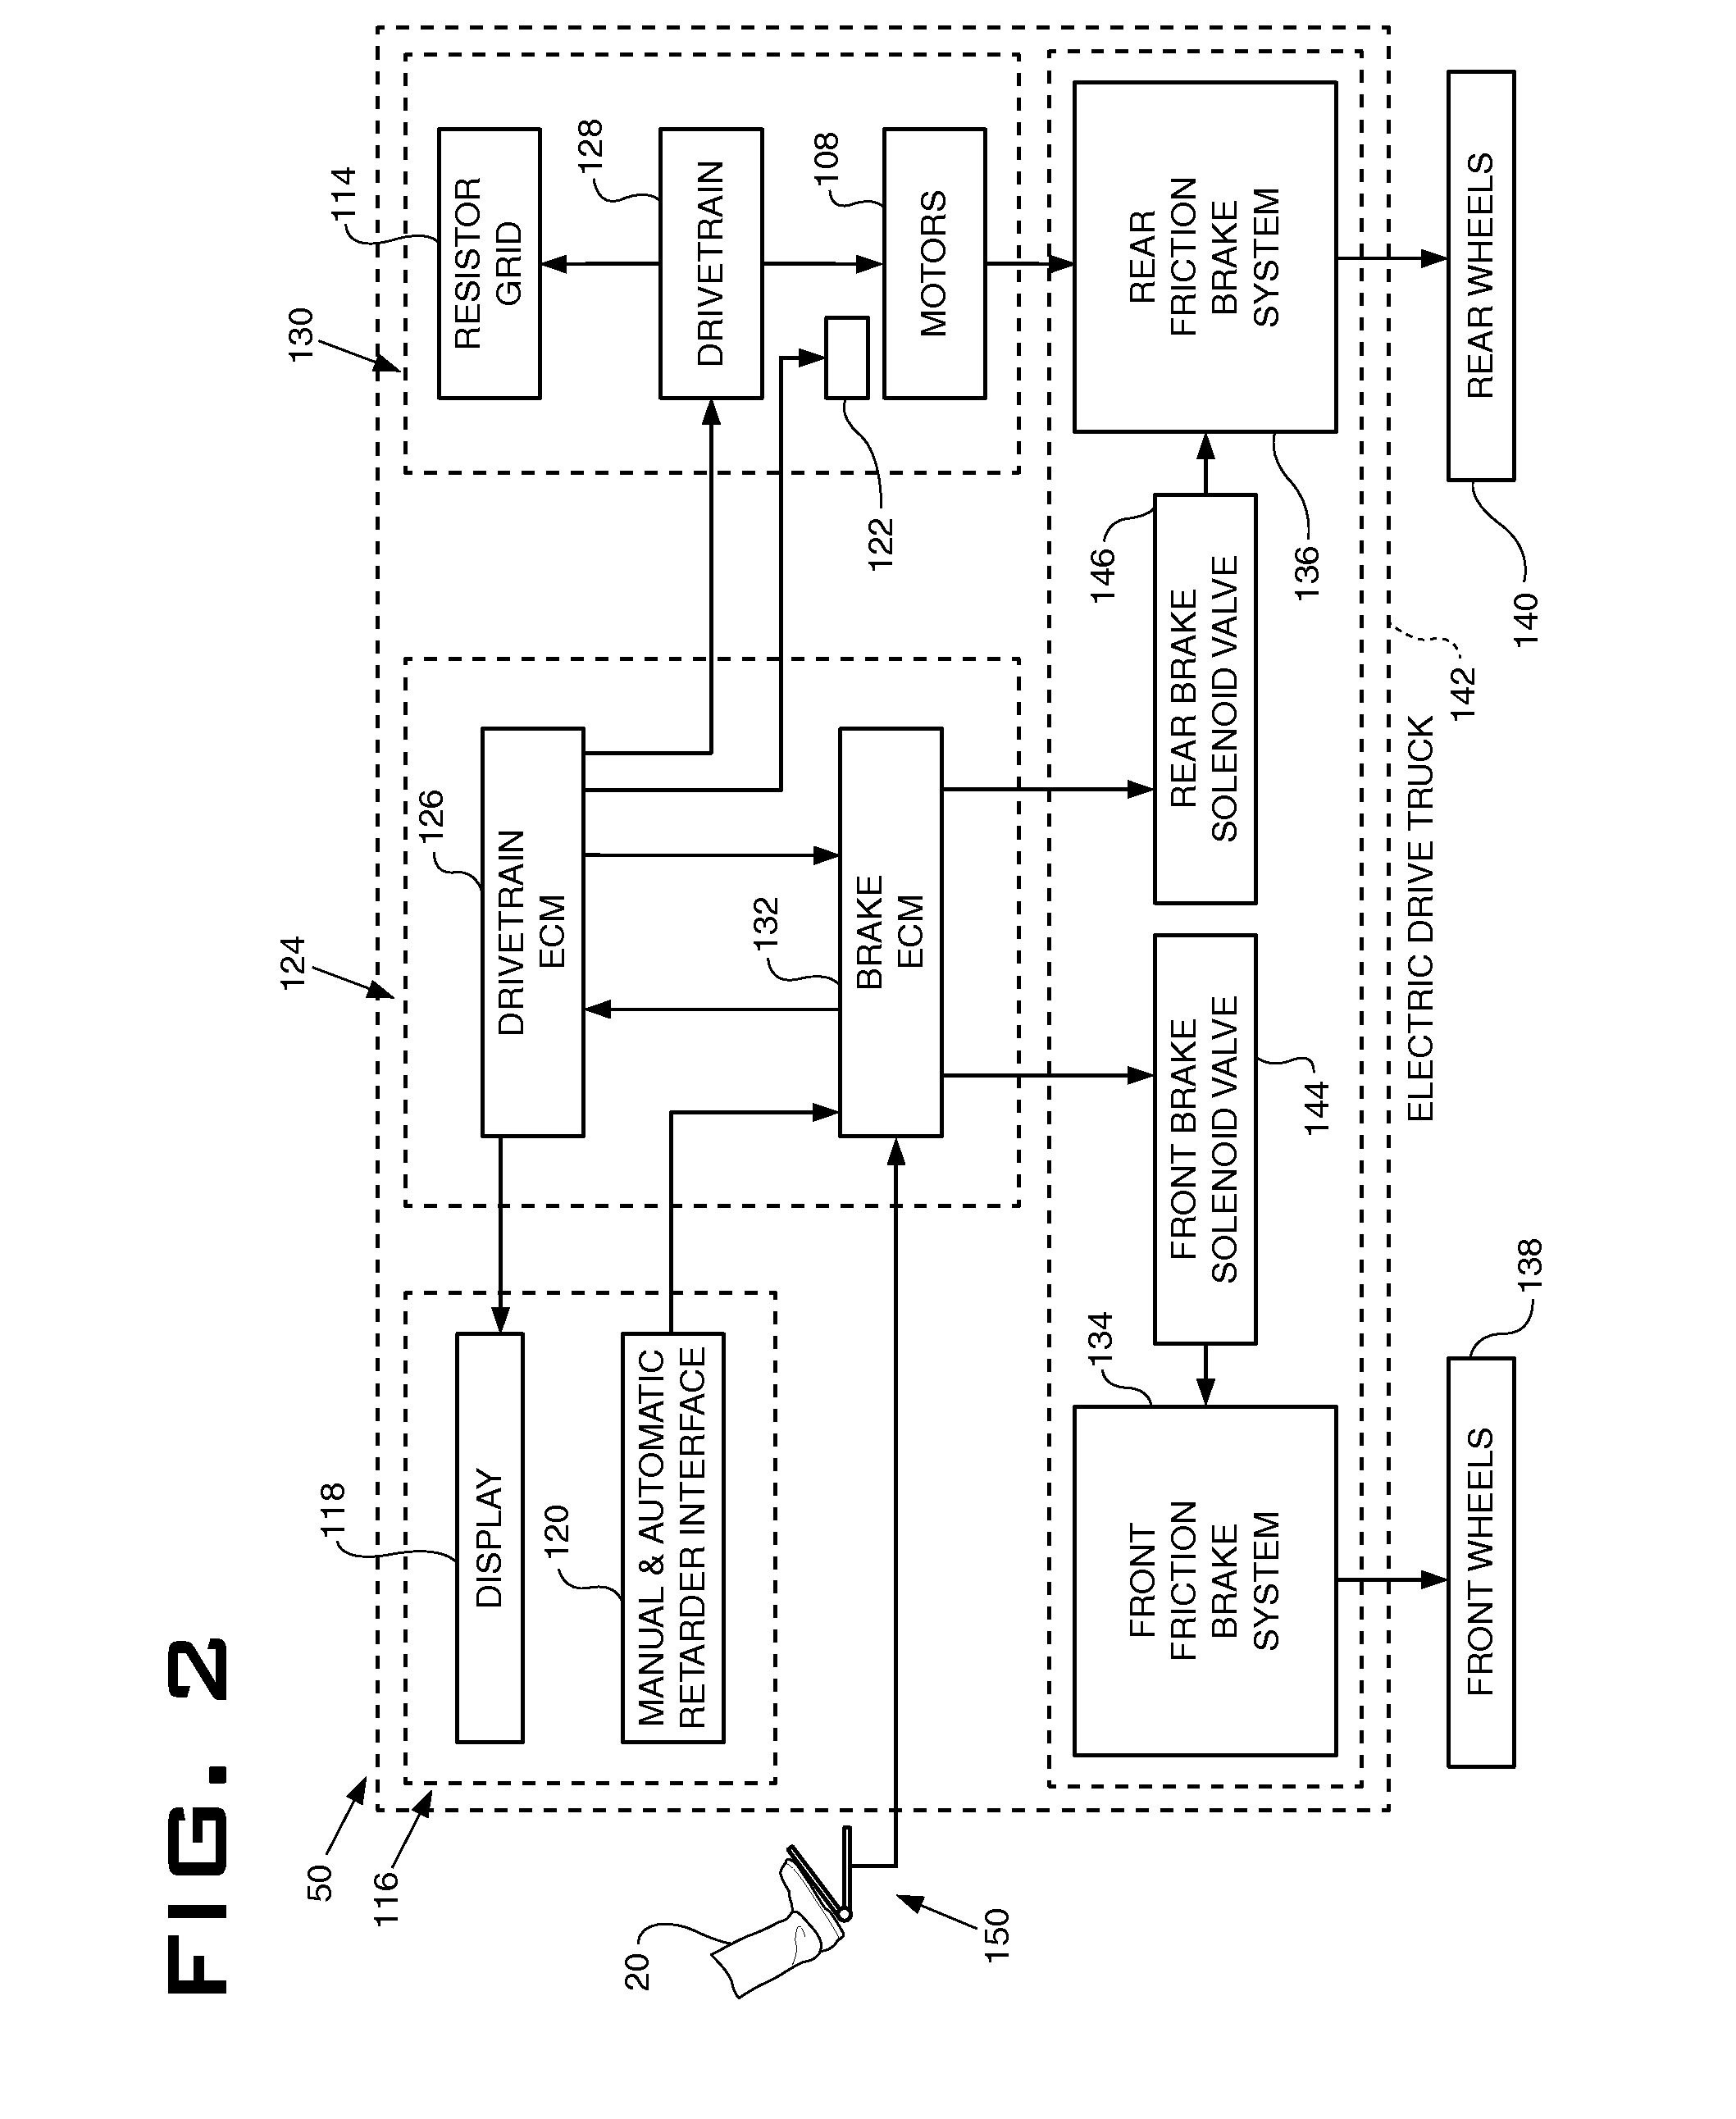 Retarding system for an electric drive machine